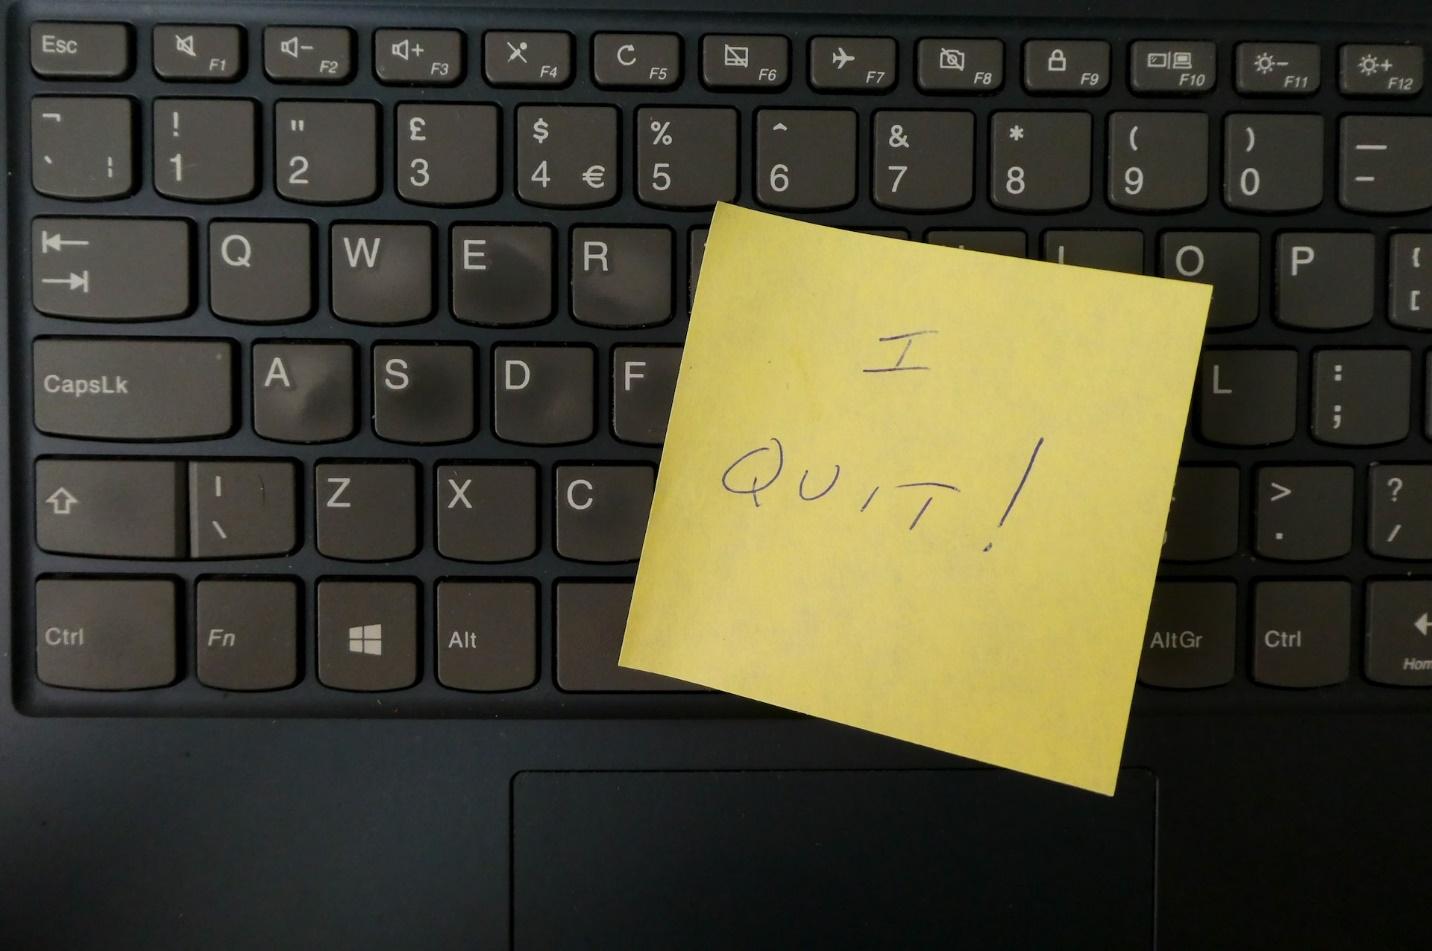 A don't quit sticker on keyboard